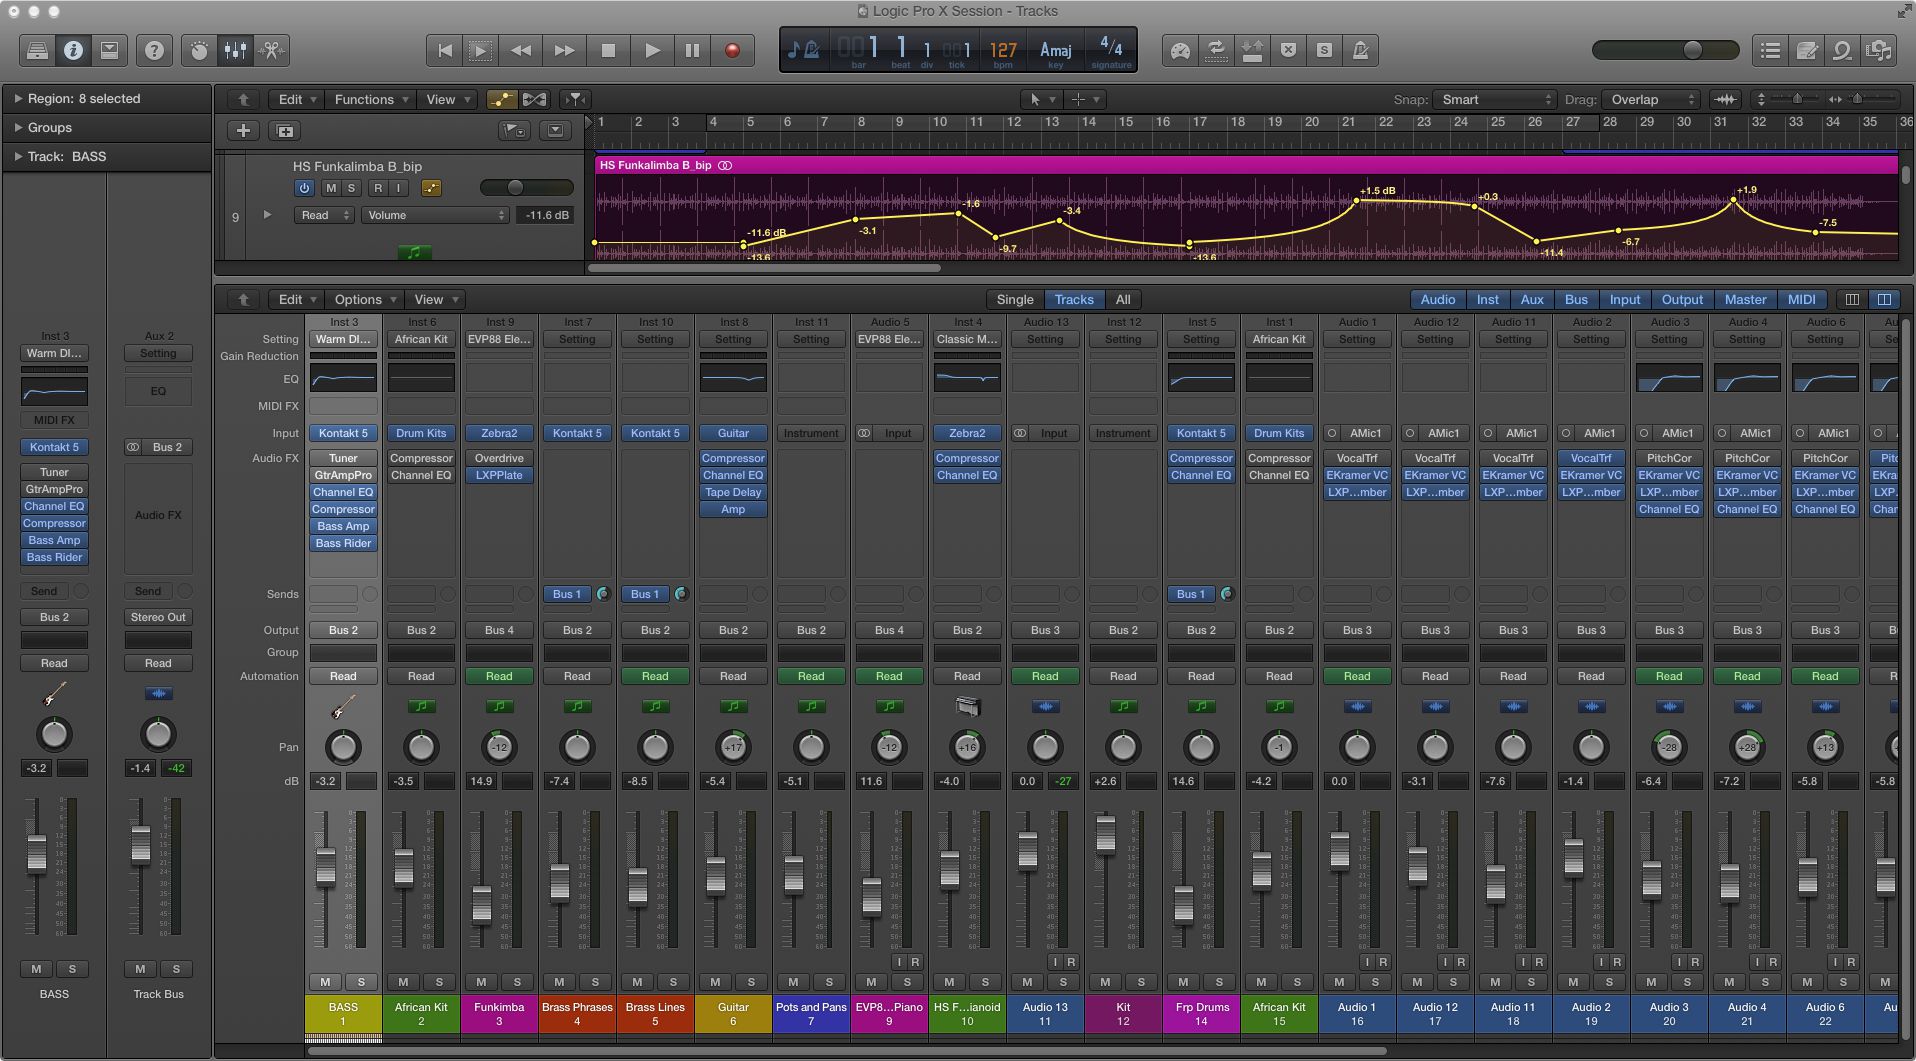 The redesigned Mixer and channel strips in Logic Pro X.